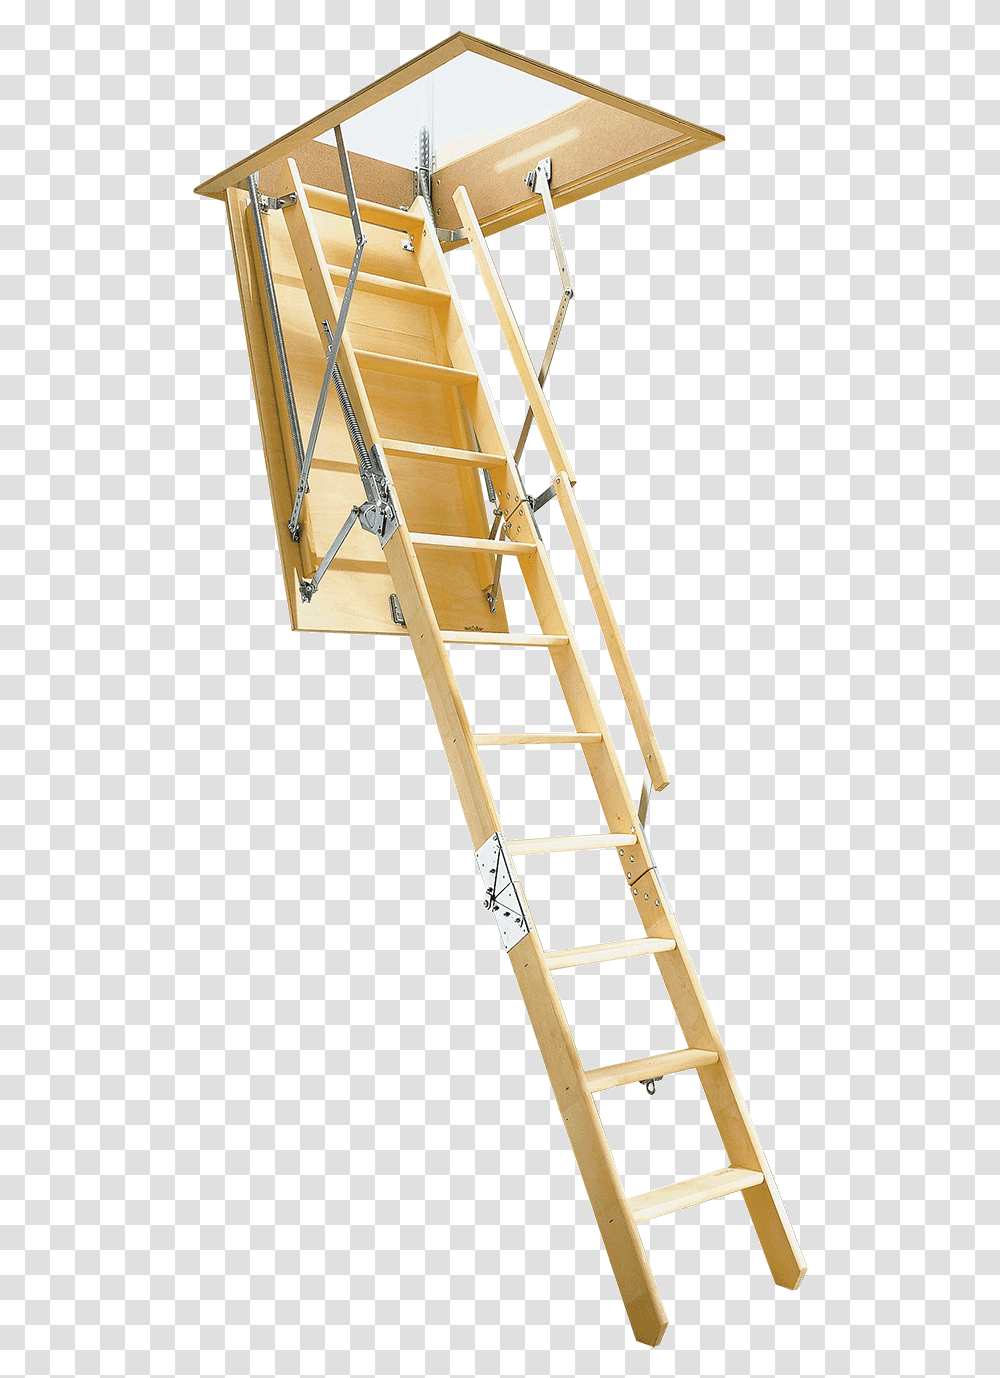 Attic Stairladder Deluxe Attic Stair Ladder, Construction, Construction Crane, Wood, Shelf Transparent Png